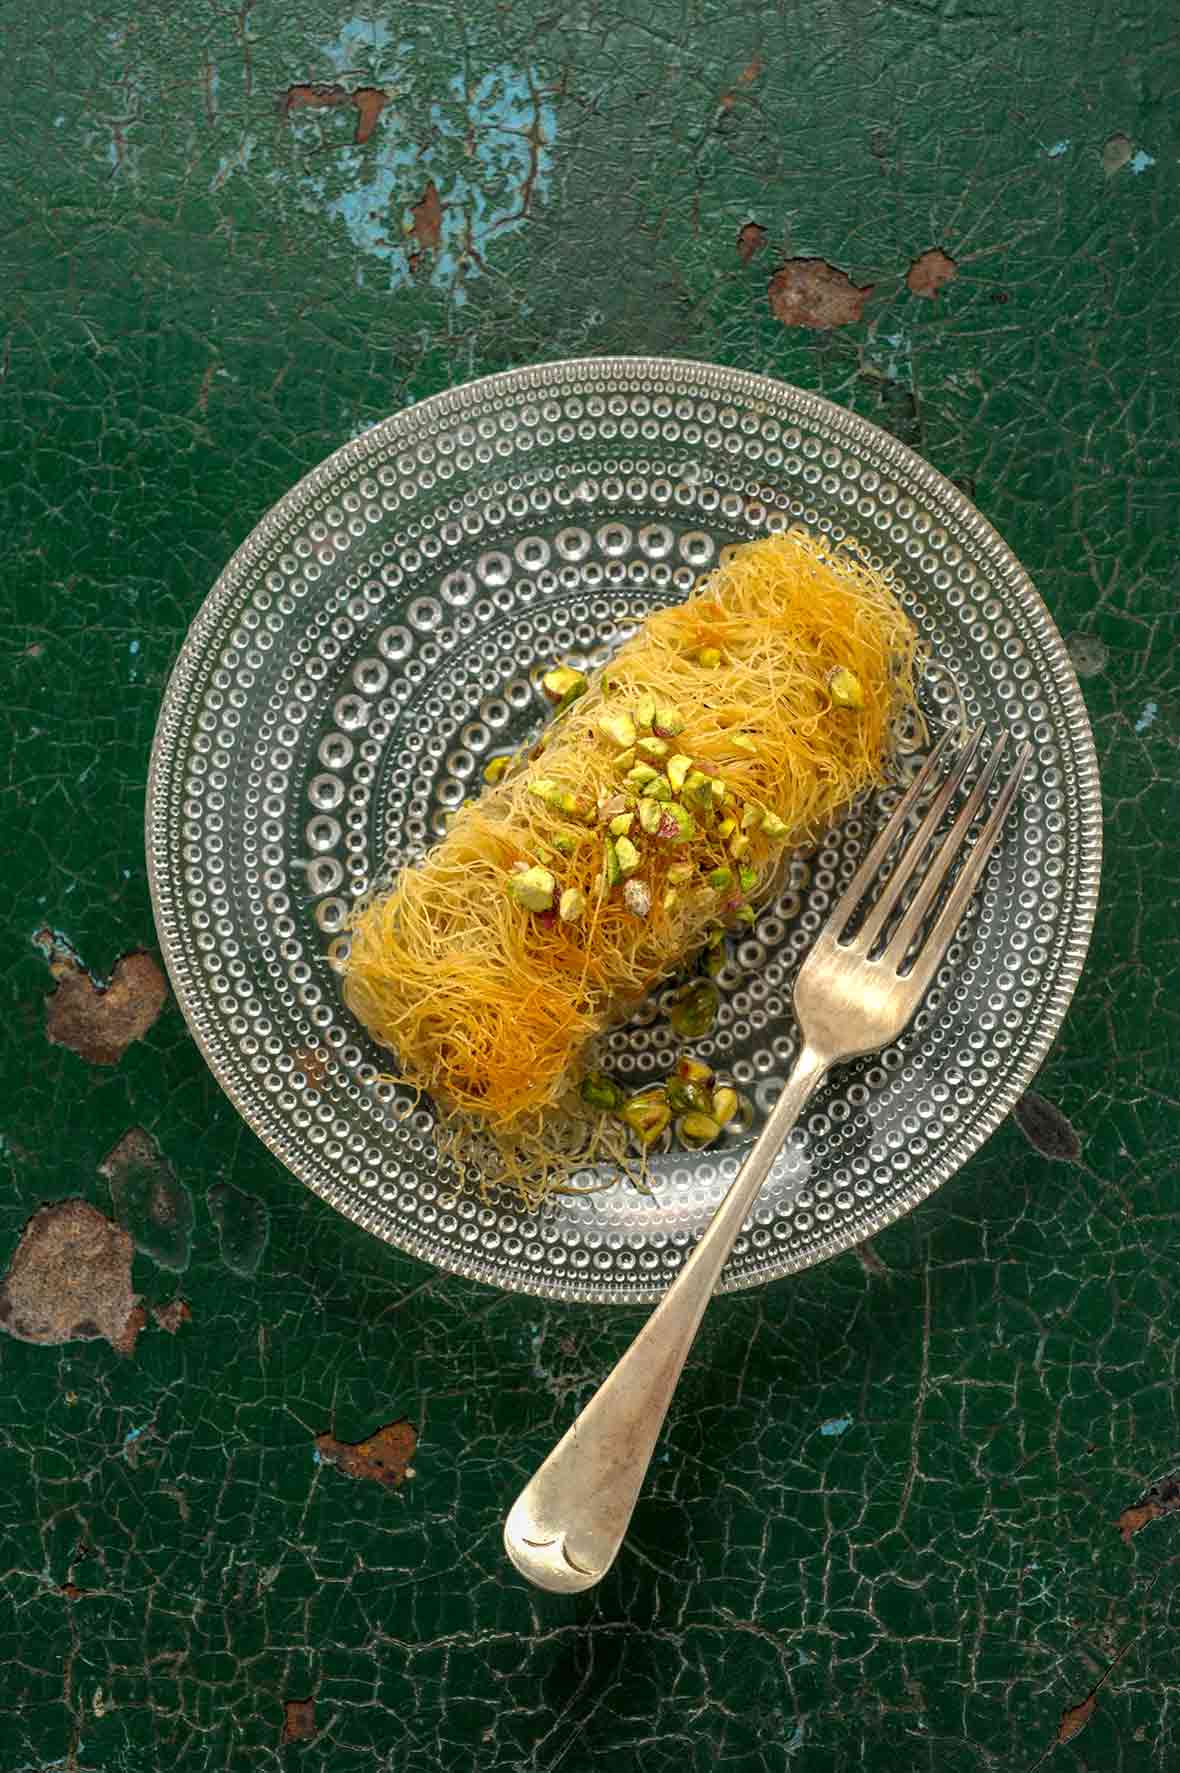 An rectangular dessert wrapped in thin stands of pastry, topped with crushed pistachios on a glass plate